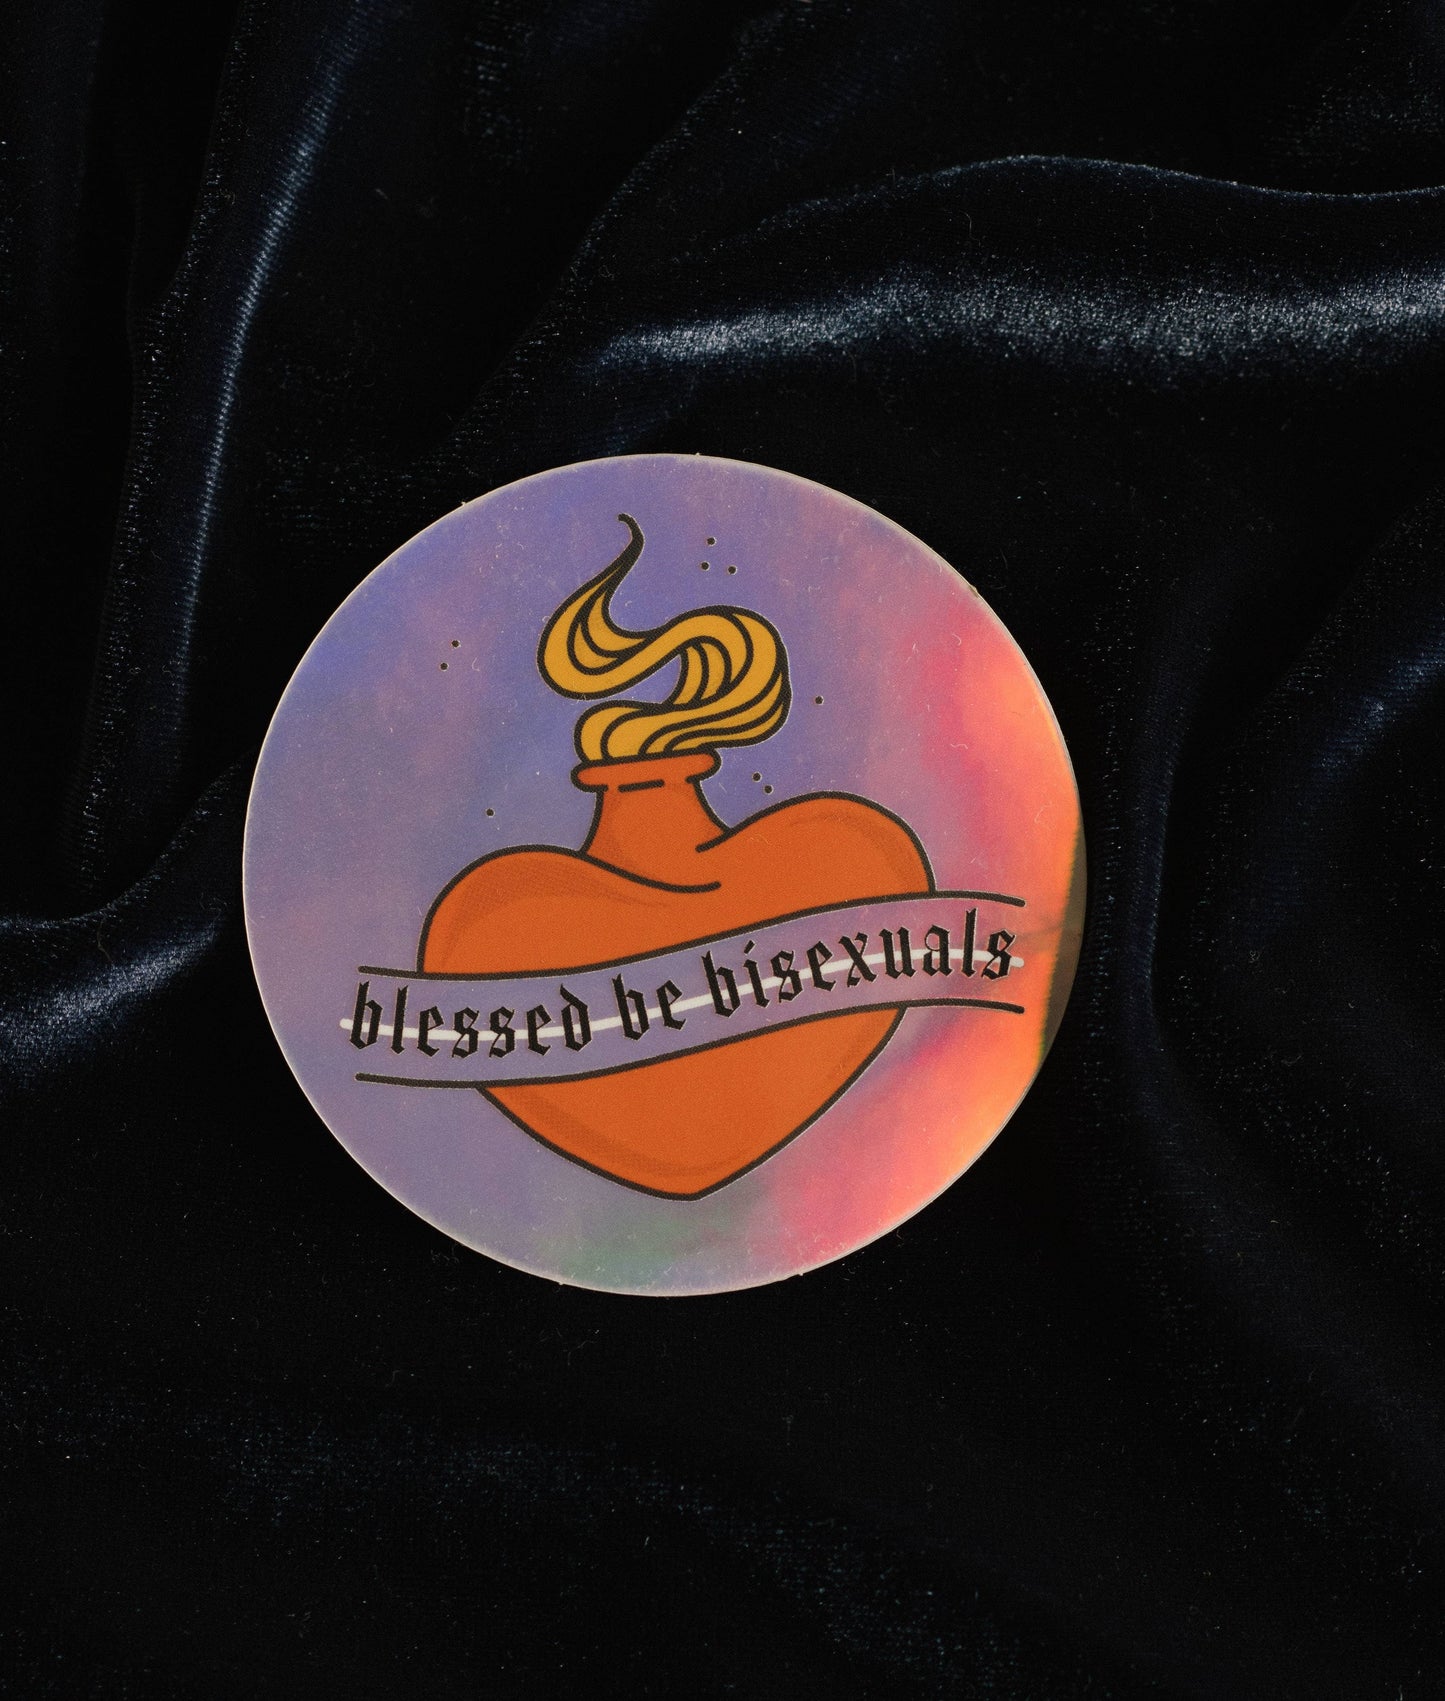 Blessed Be Bisexuals Sticker